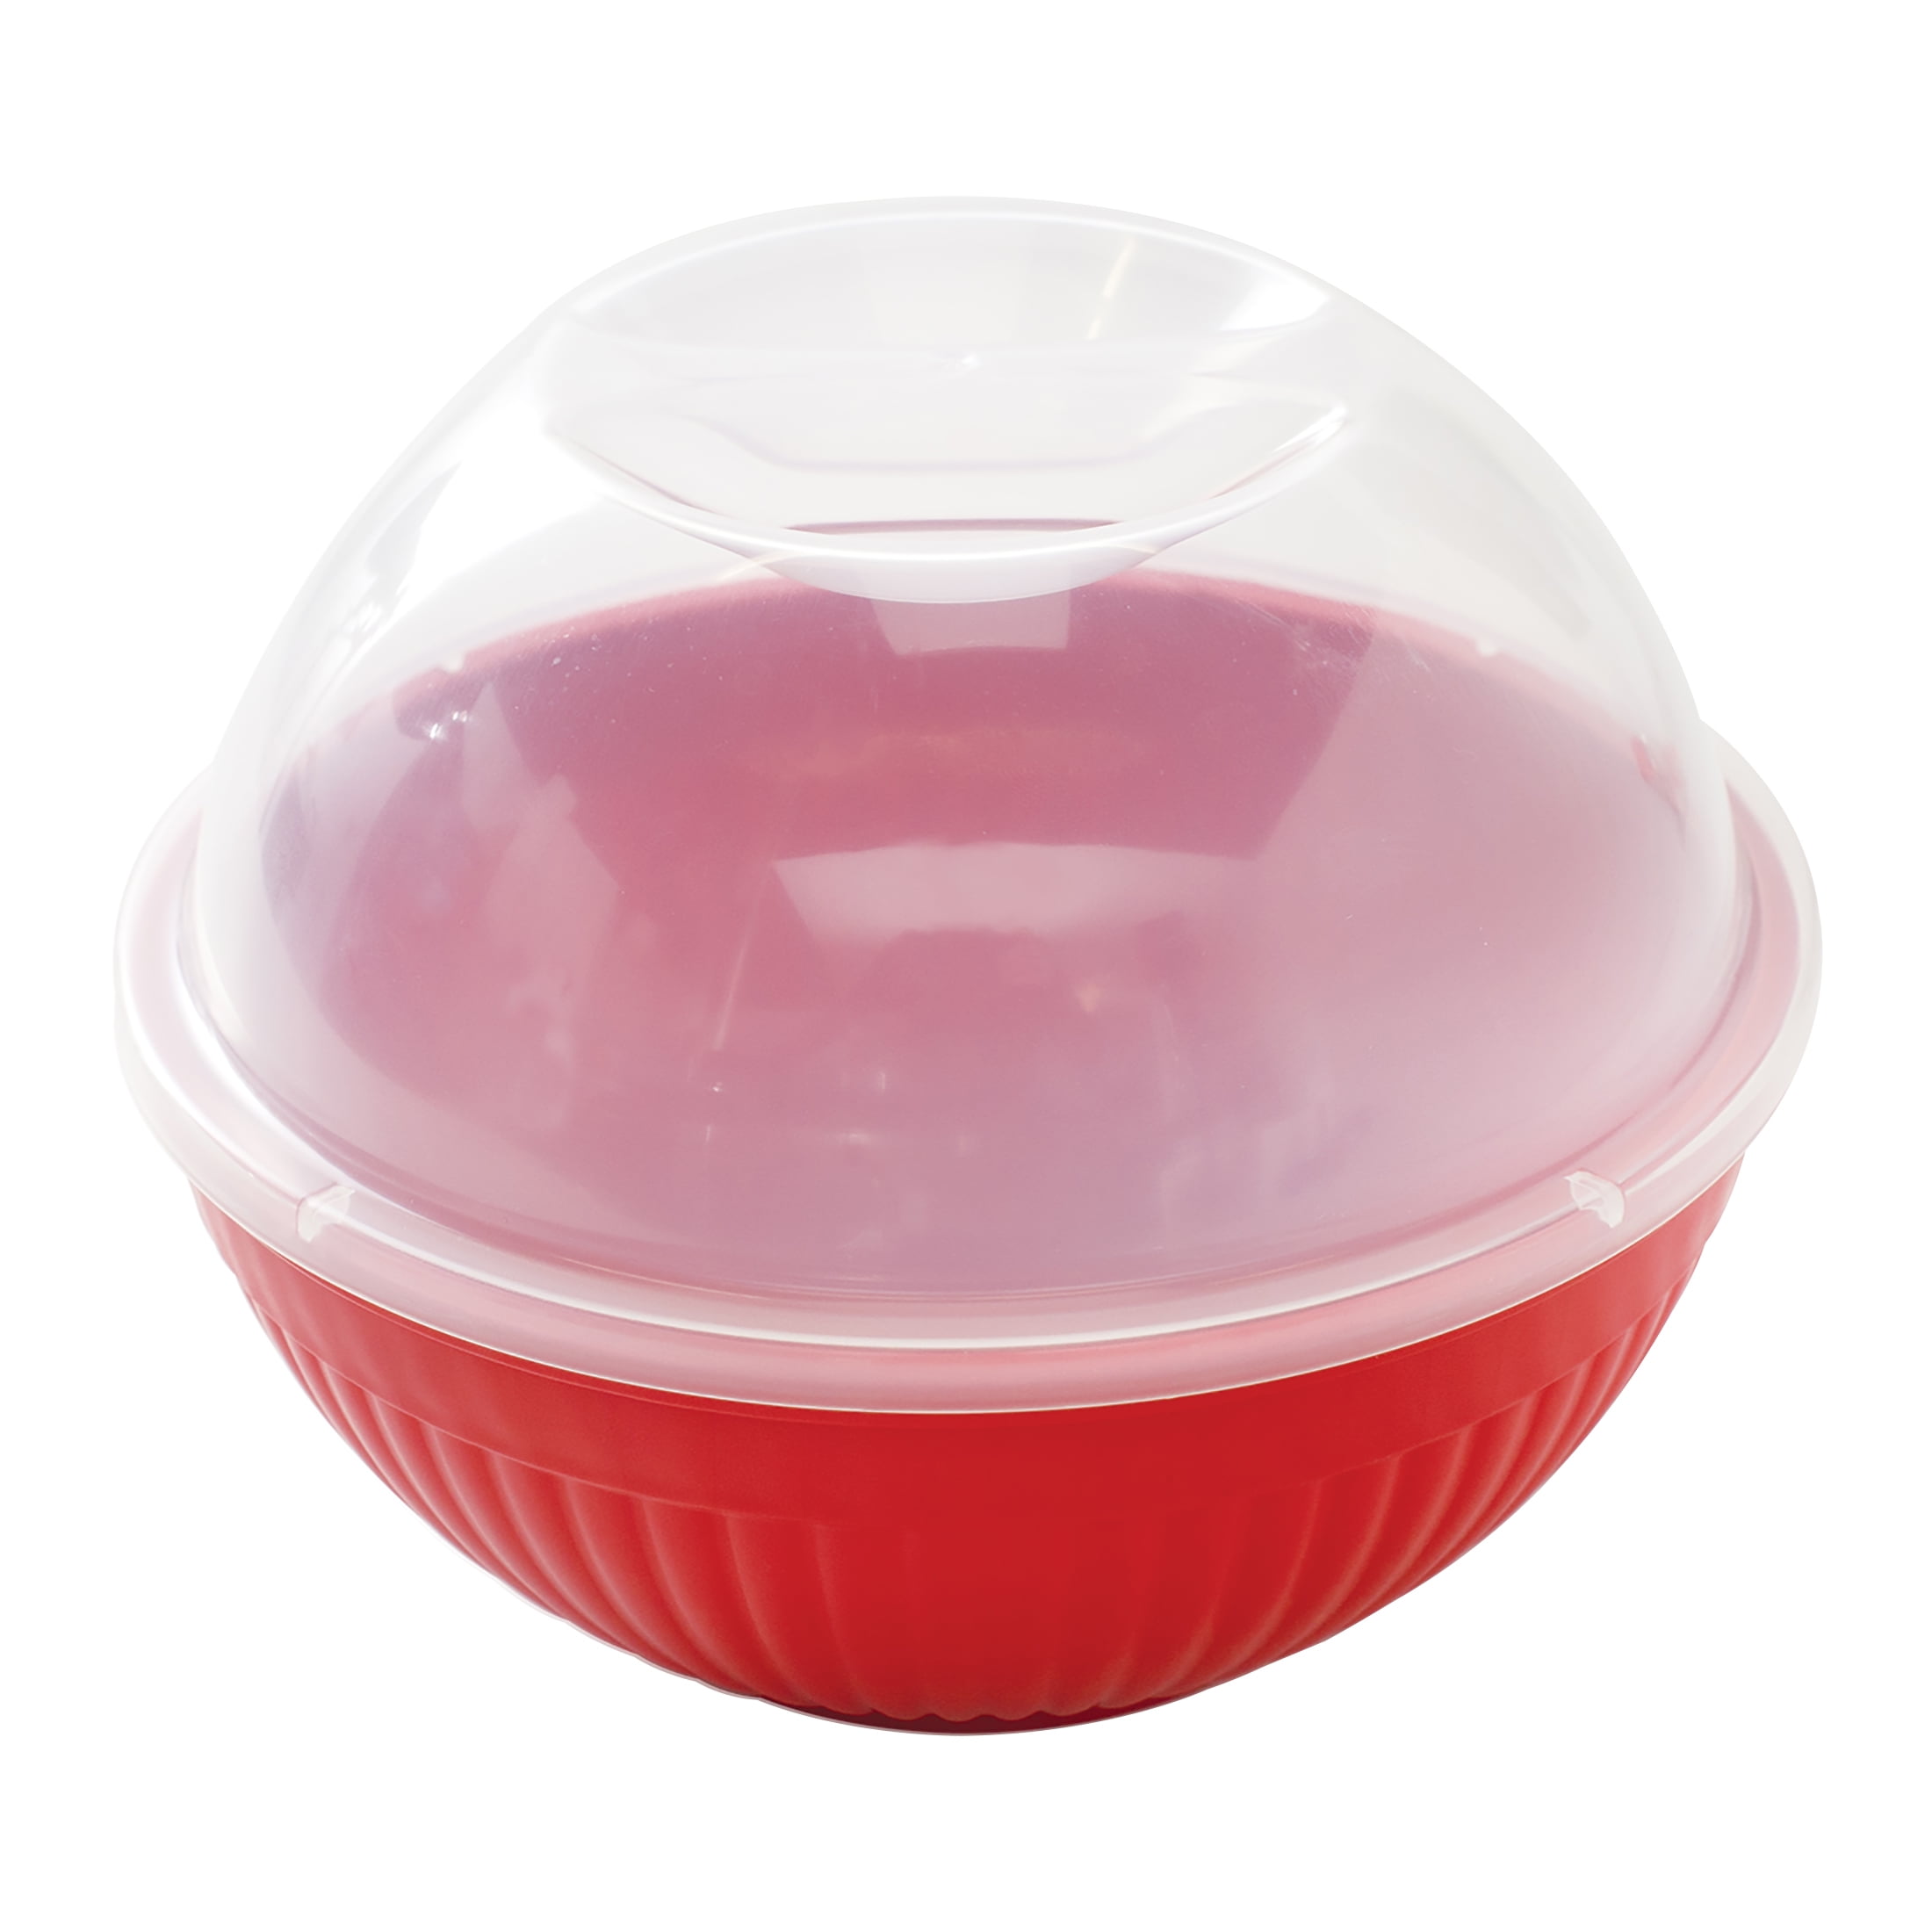 Nordic Ware 8 Cup Microwave Quick Pop Popcorn Popper, Red, 68402W